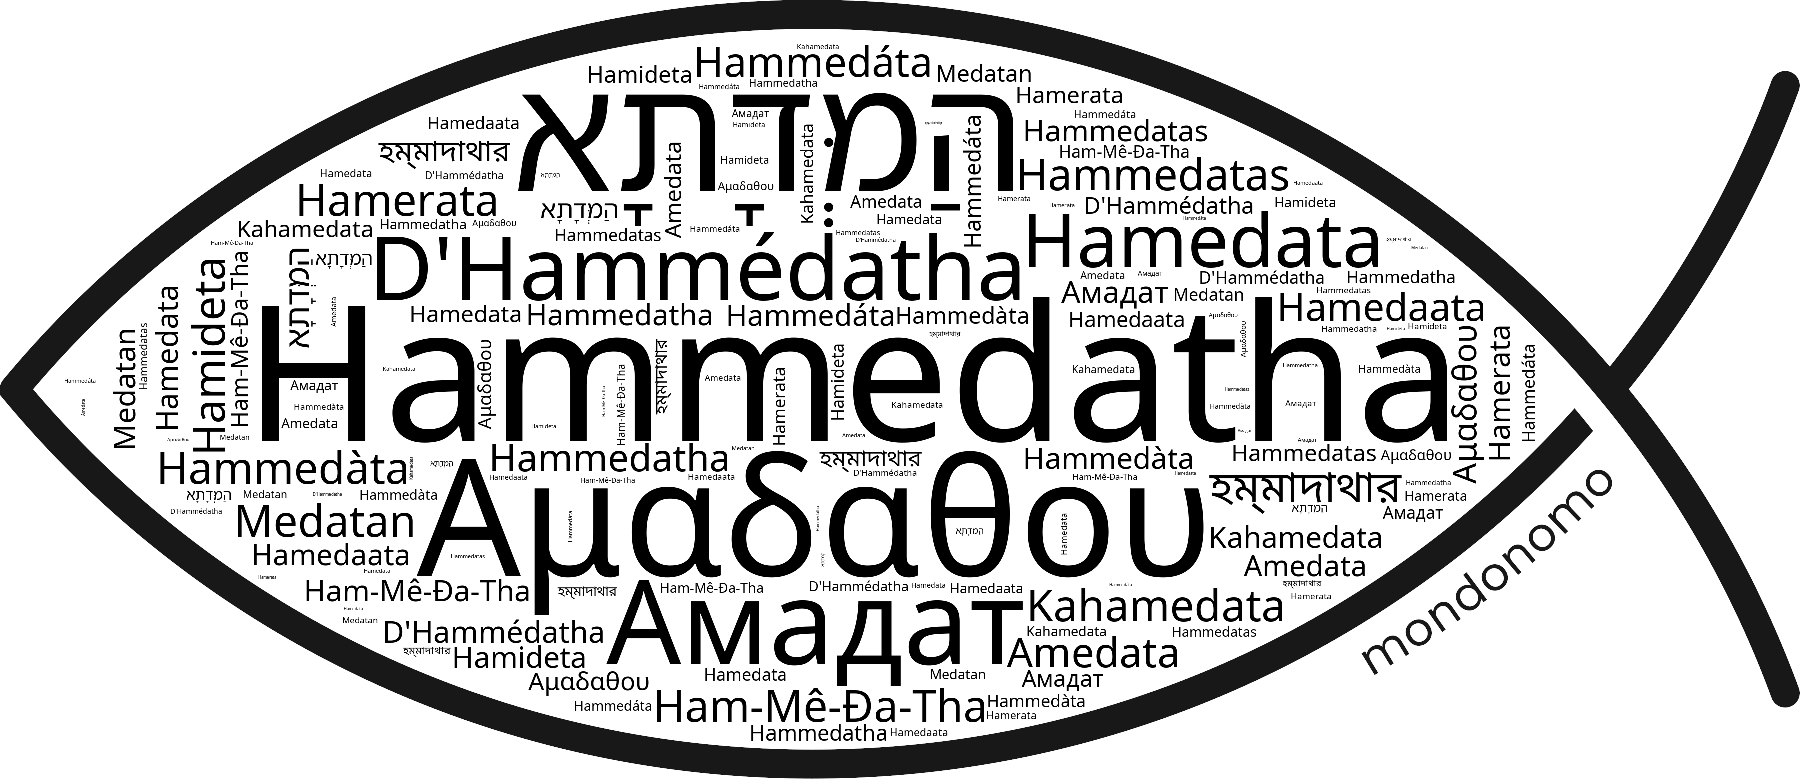 Name Hammedatha in the world's Bibles